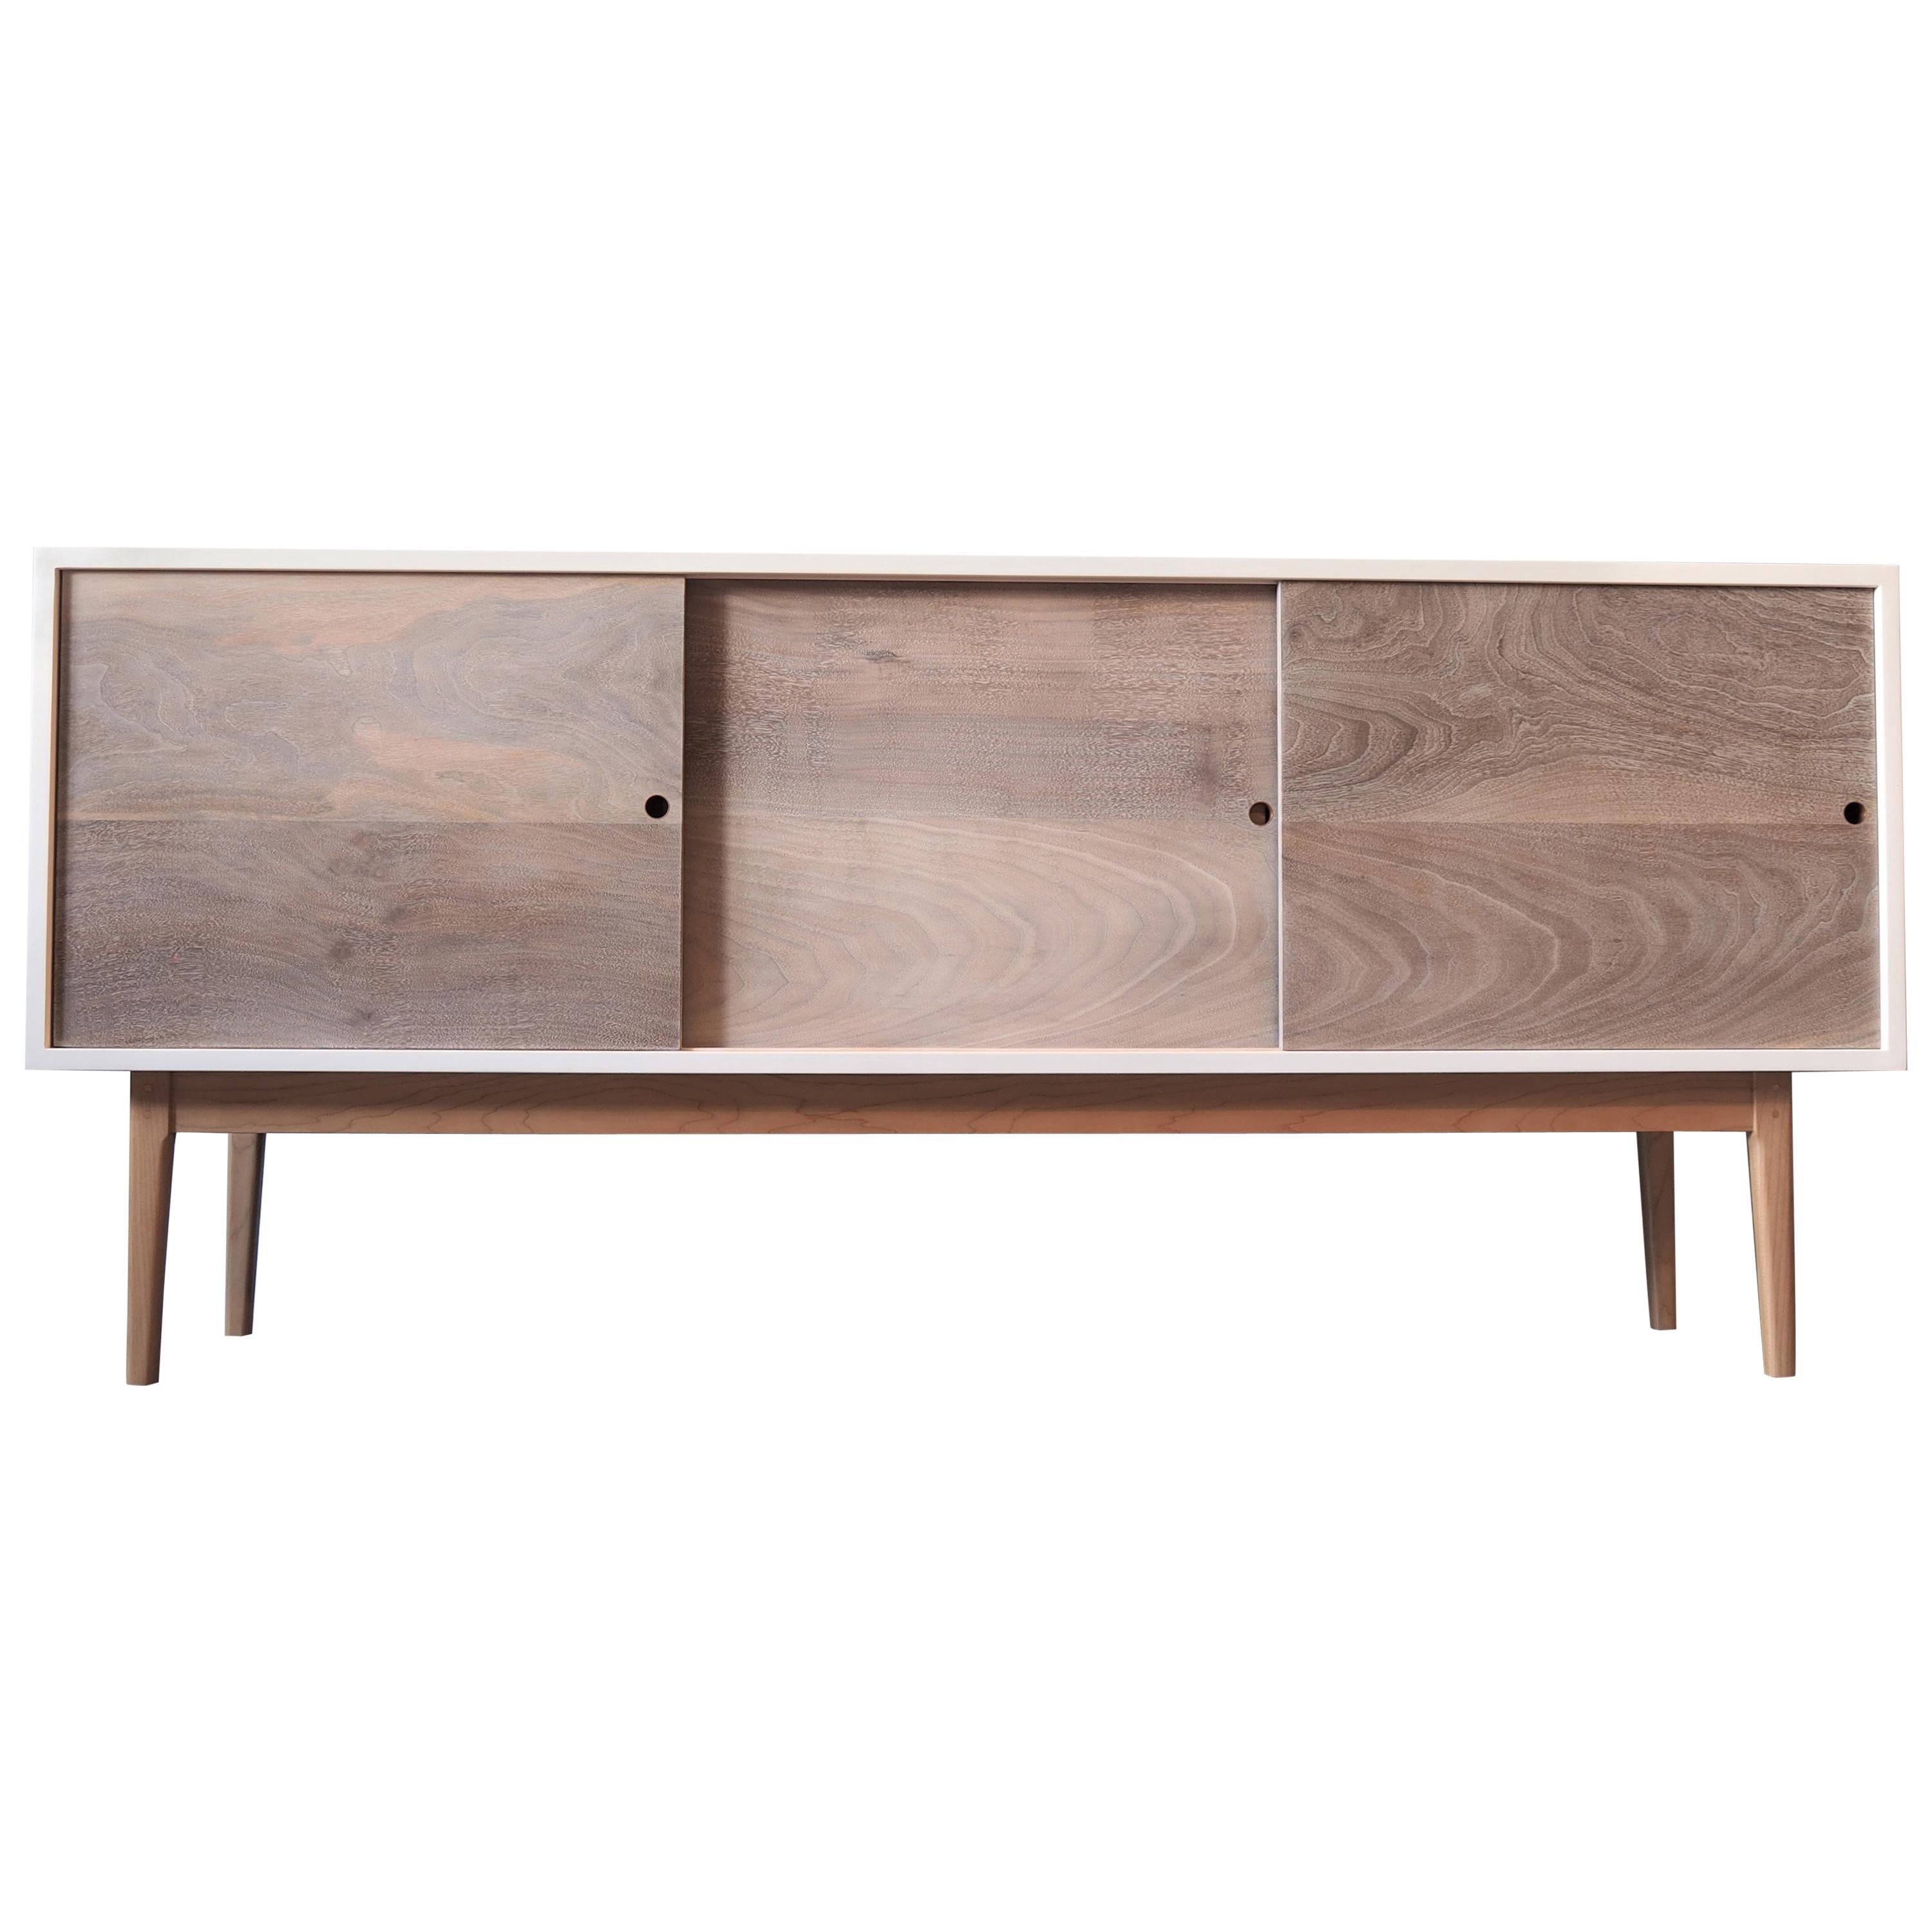 White Sideboard with Sliding walnut Doors and a solid maple base by MSJ Studio